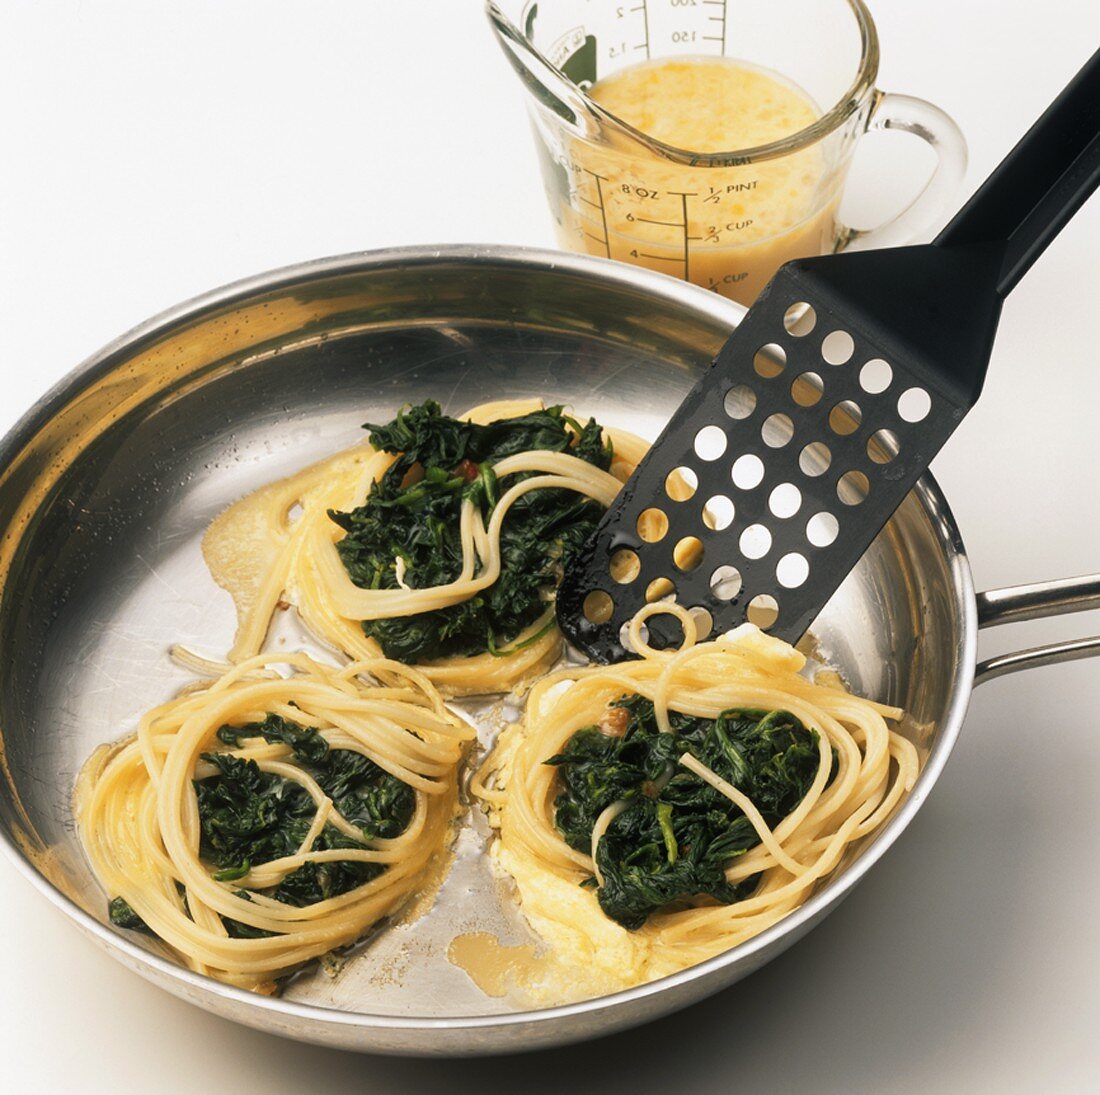 Making fried spaghetti nests with spinach